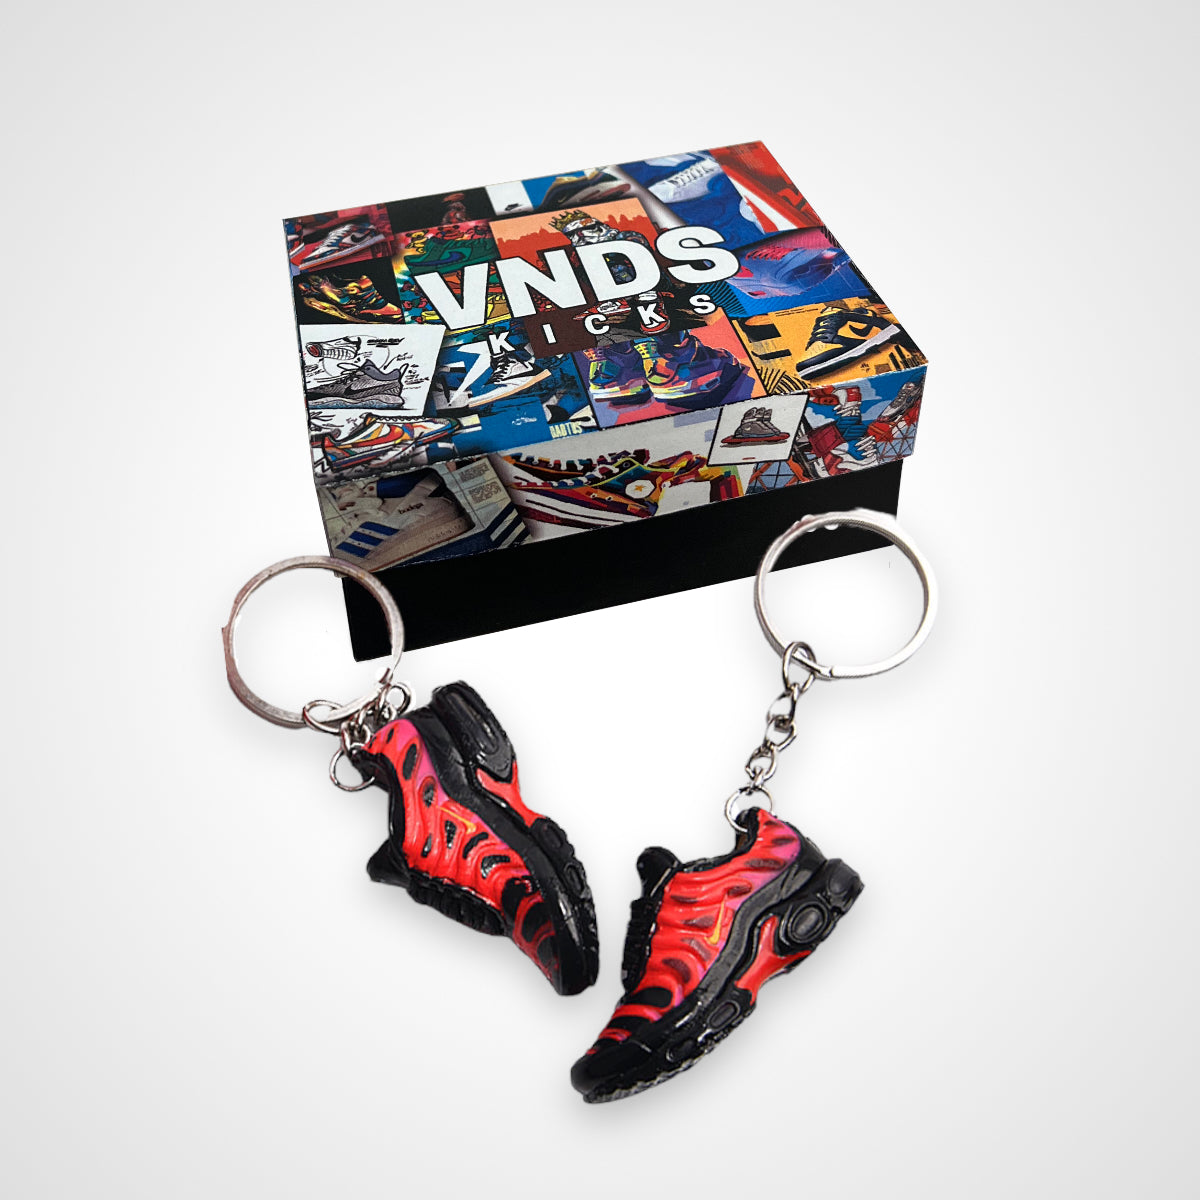 Air Max Plus TN "Supreme Fire Pink" - Sneakers 3D Keychain